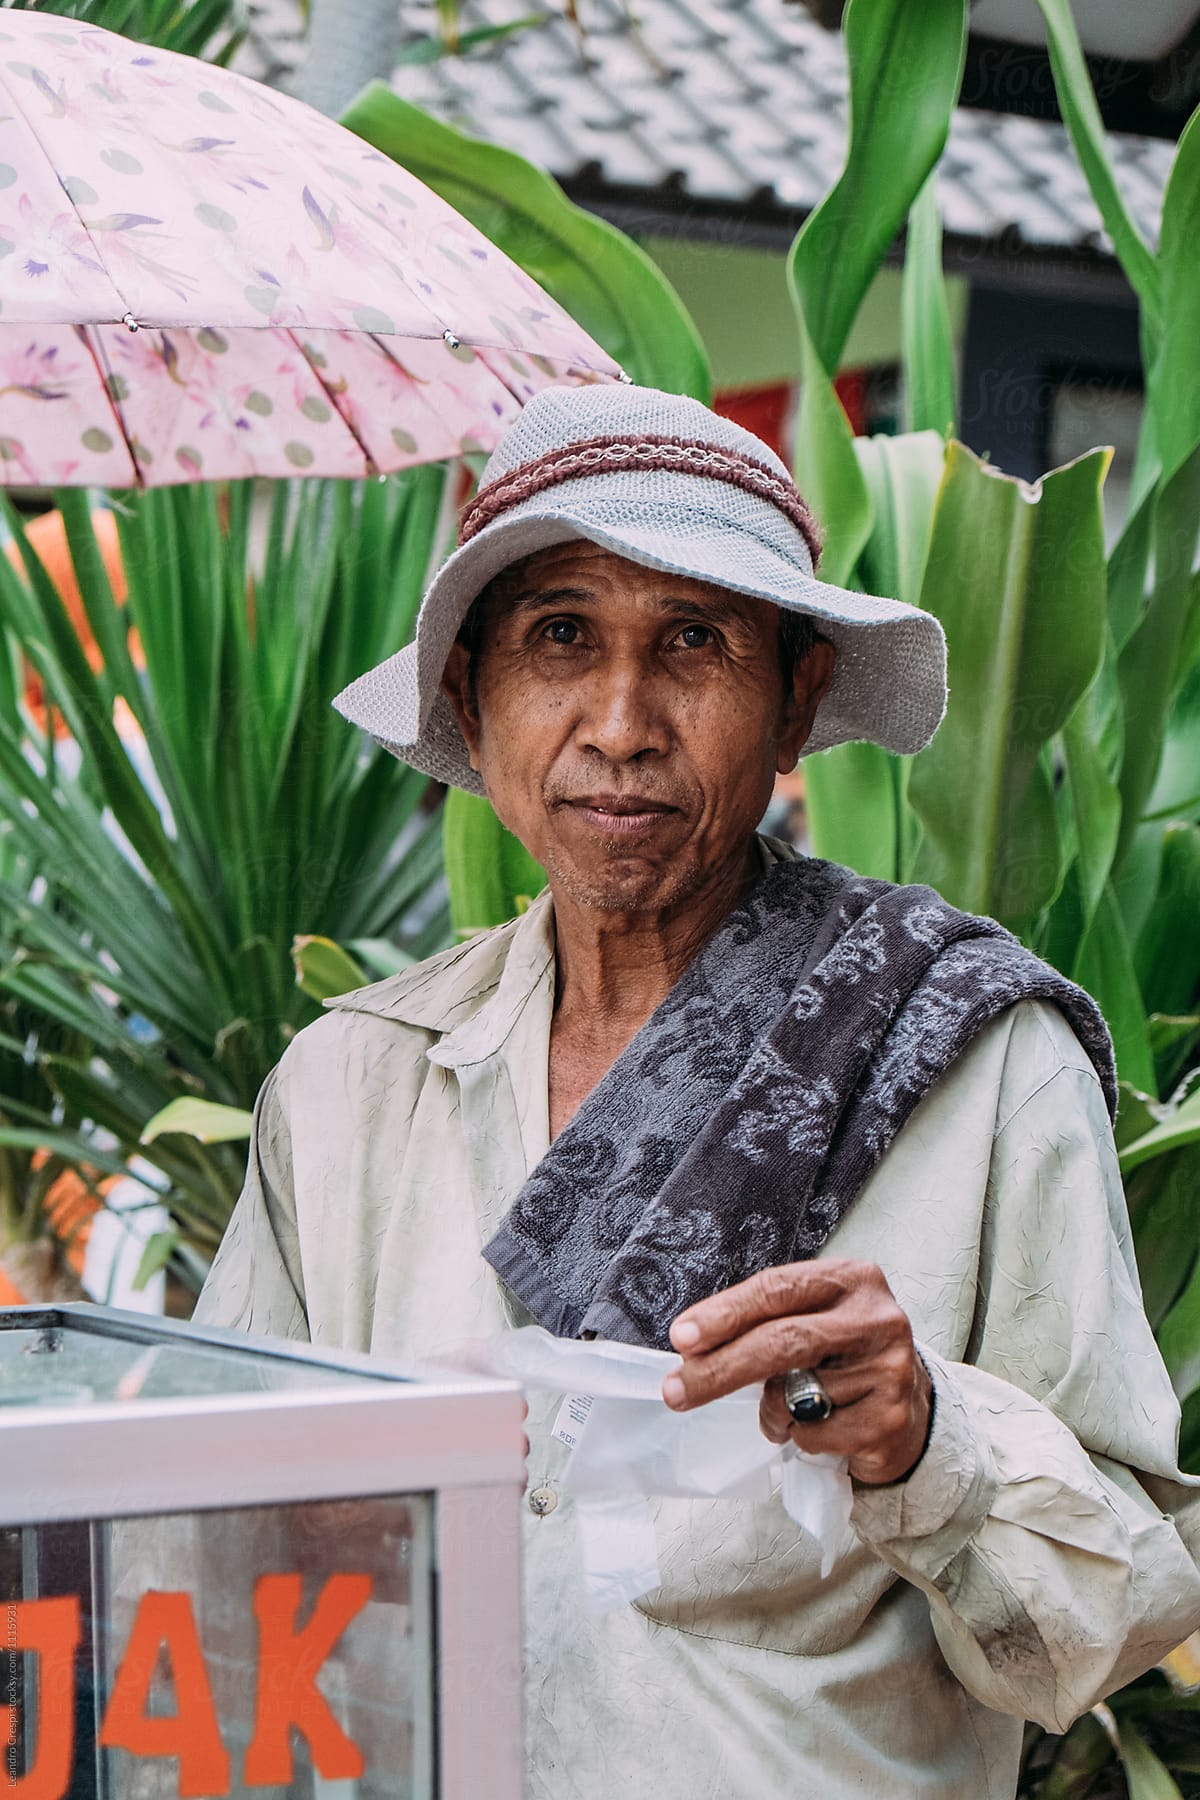 Indonesian Old Man Preparing And Selling Typical Food On The Street Del Colaborador De Stocksy